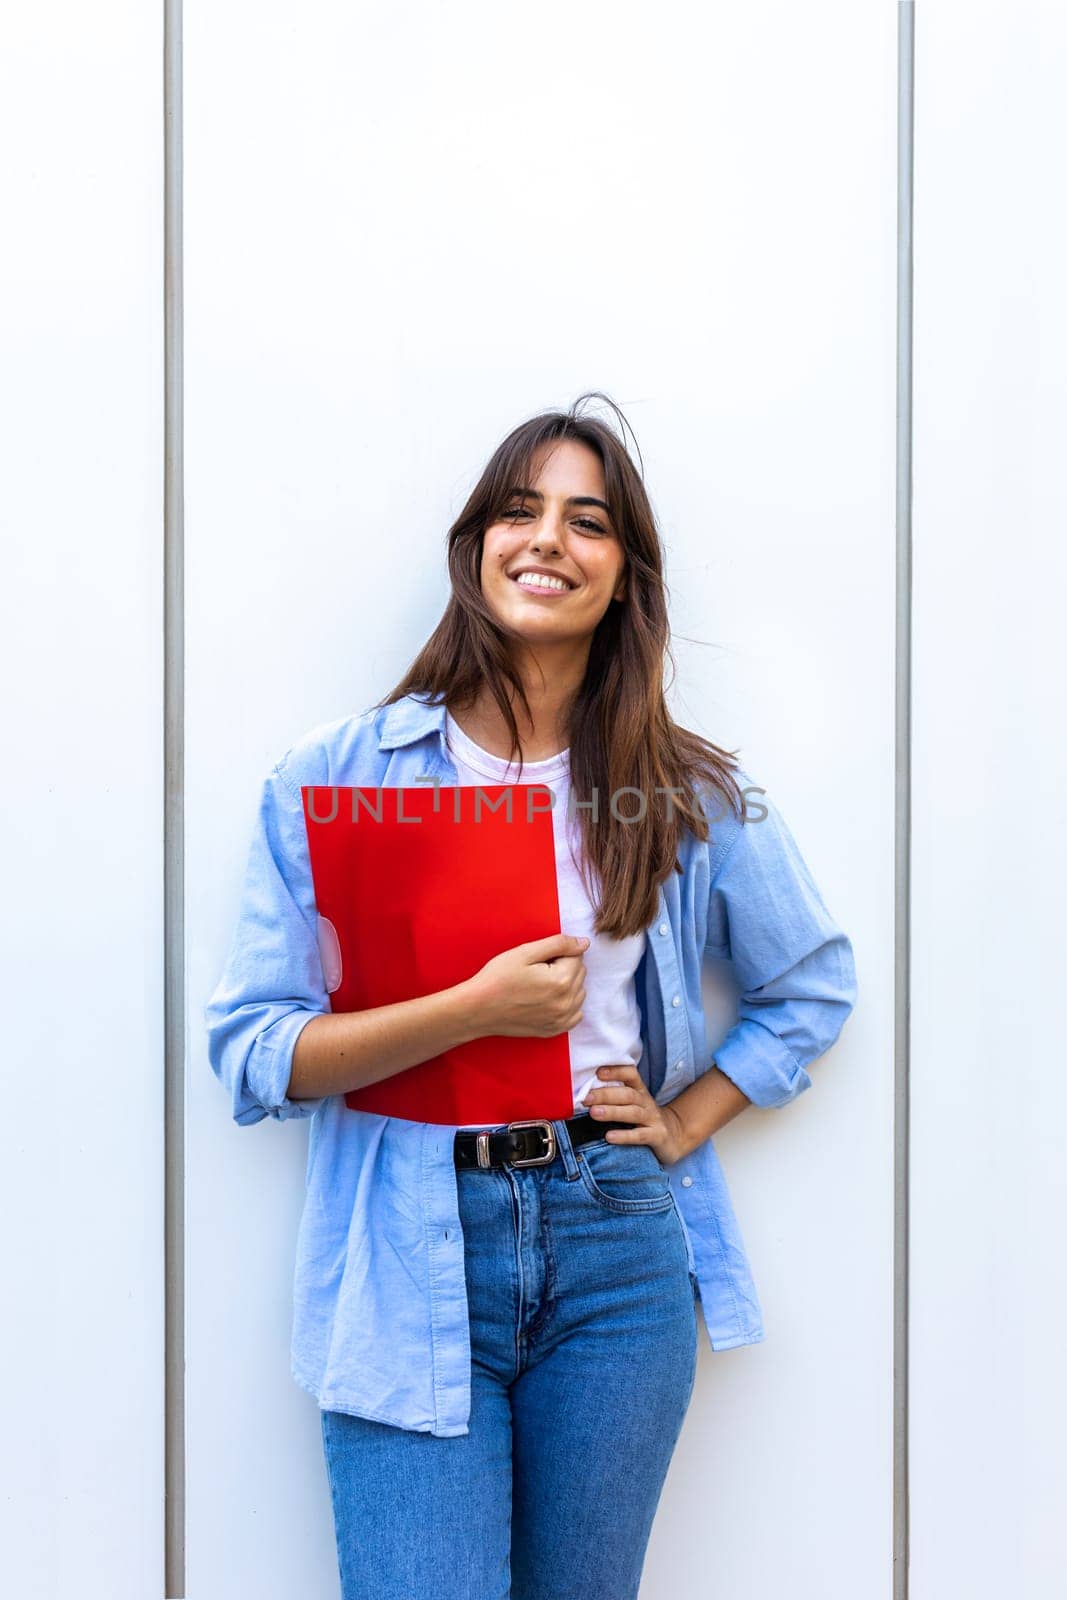 Happy, smiling female college student looking at camera holding red folder. Vertical image. Education by Hoverstock